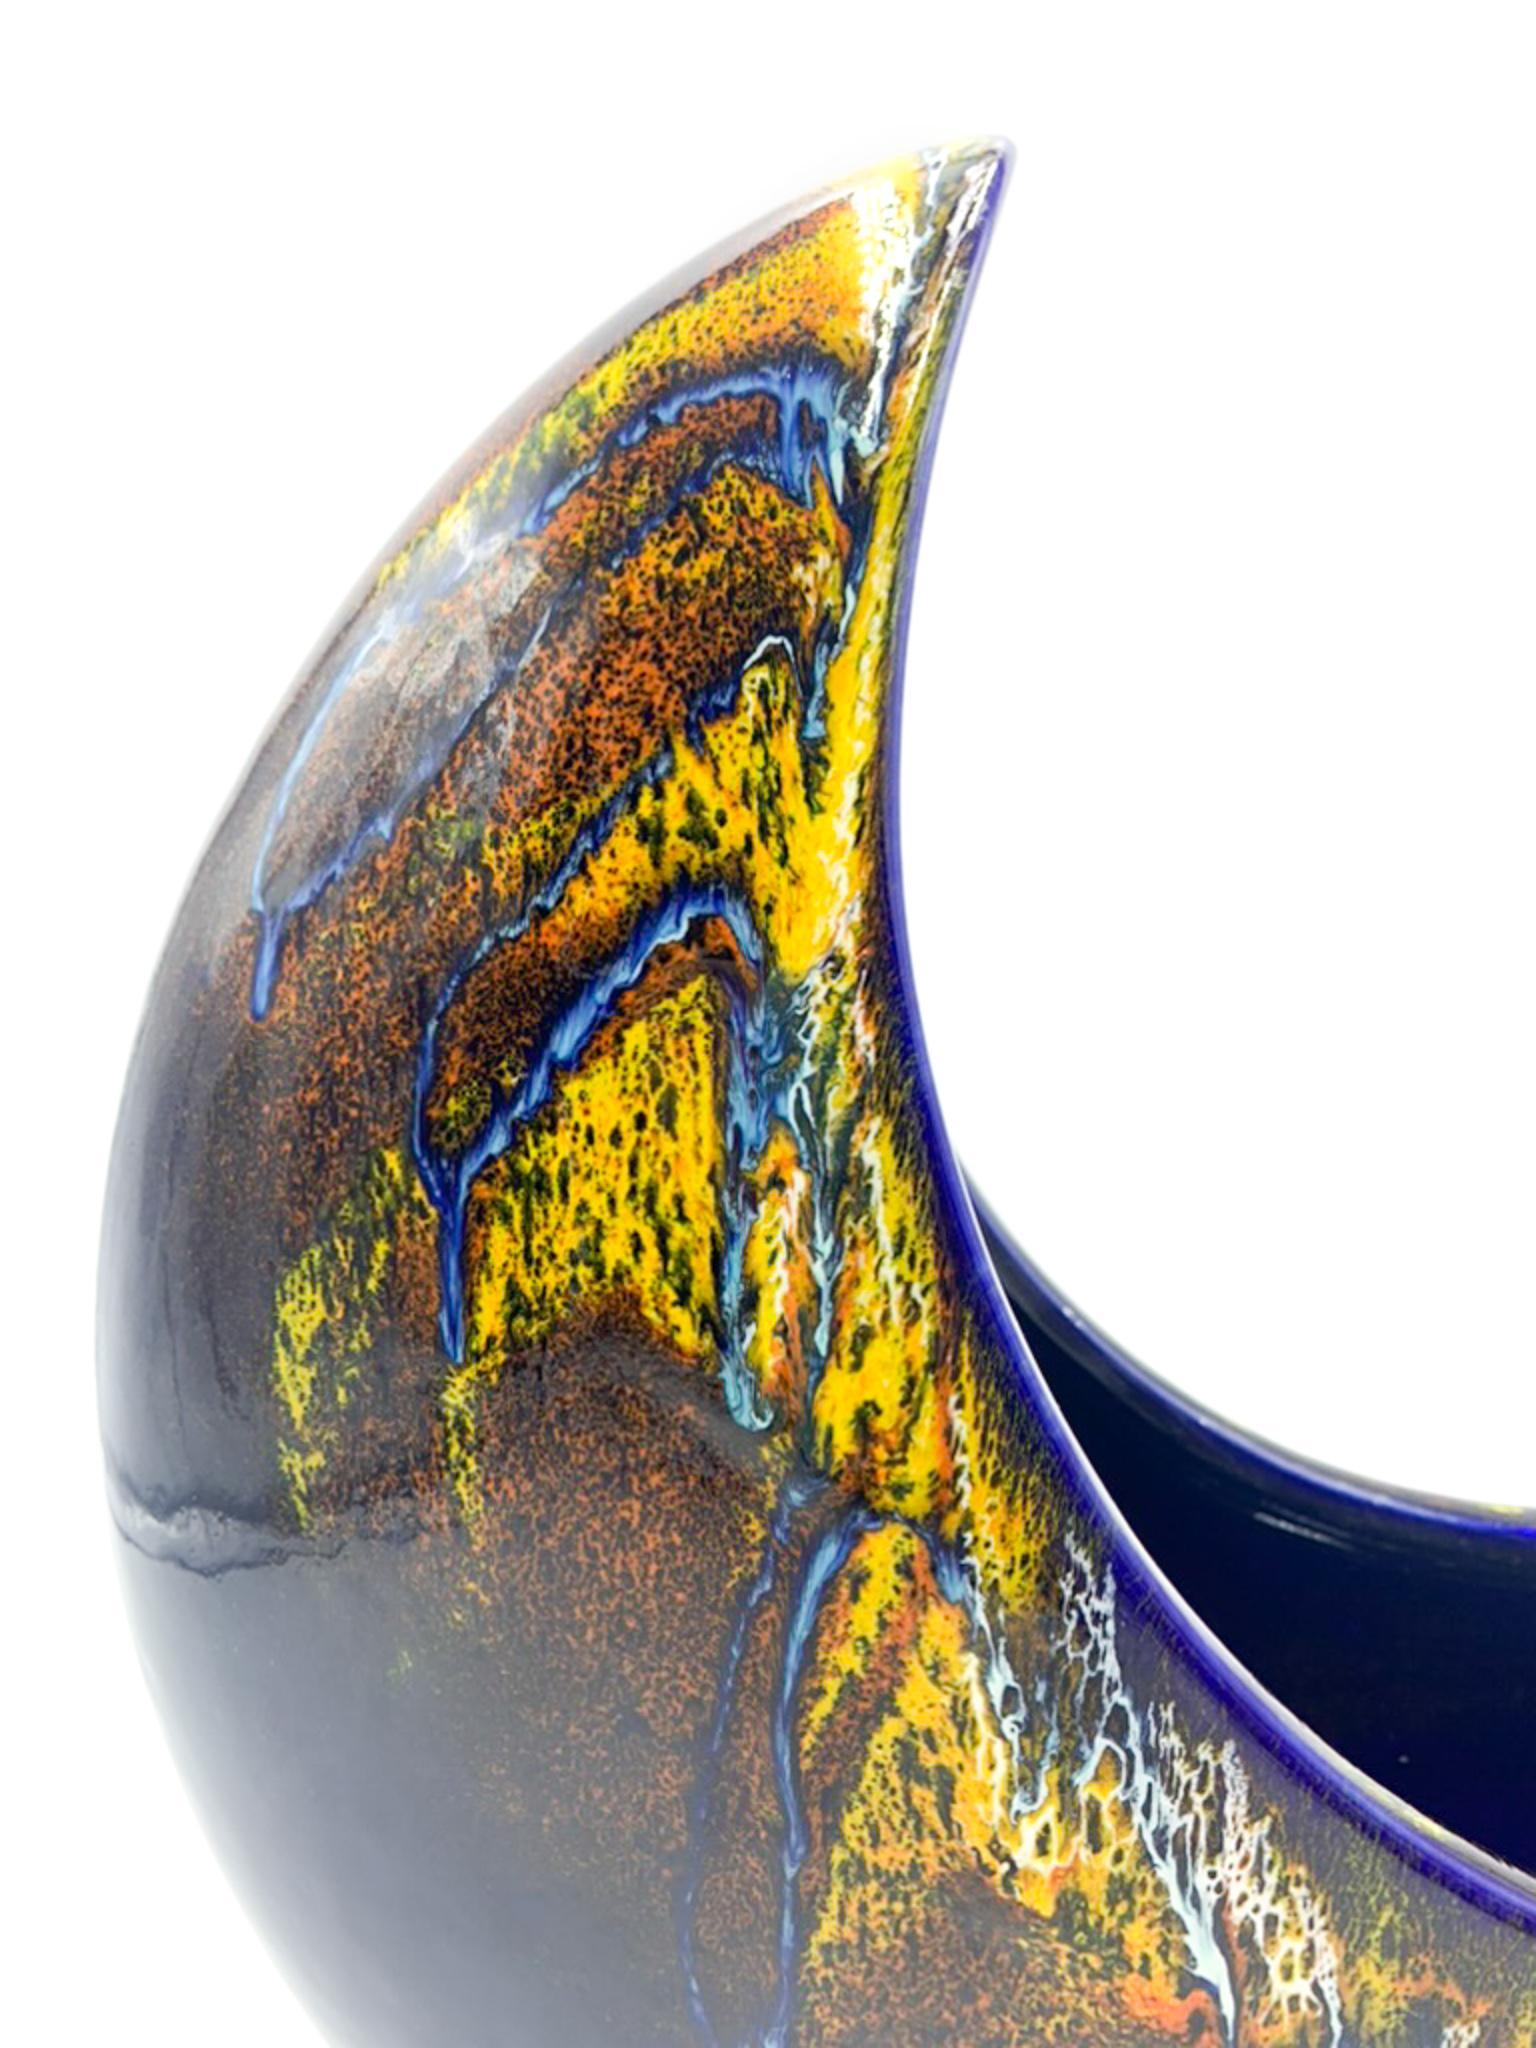 Italian Crescent-Shaped Hand Painted Vase by Roberto Rigon for Bertoncello, 1960s